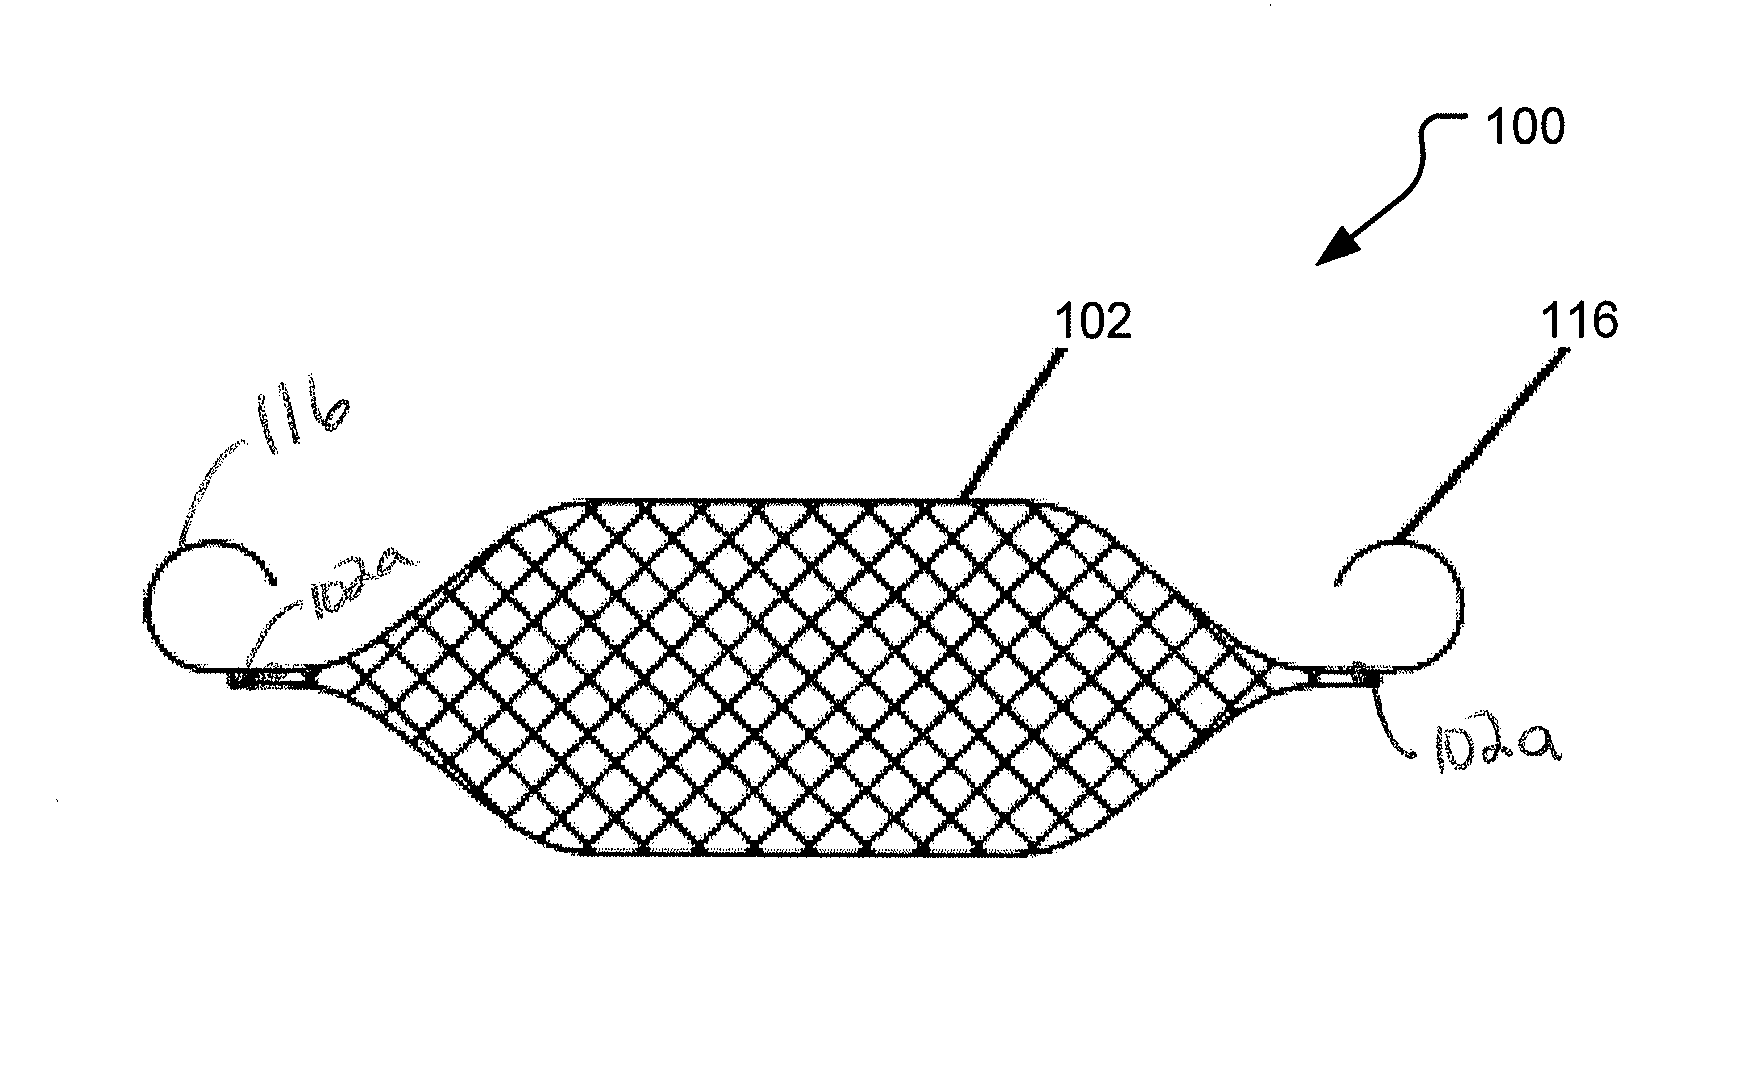 Bone growth promotion systems and methods